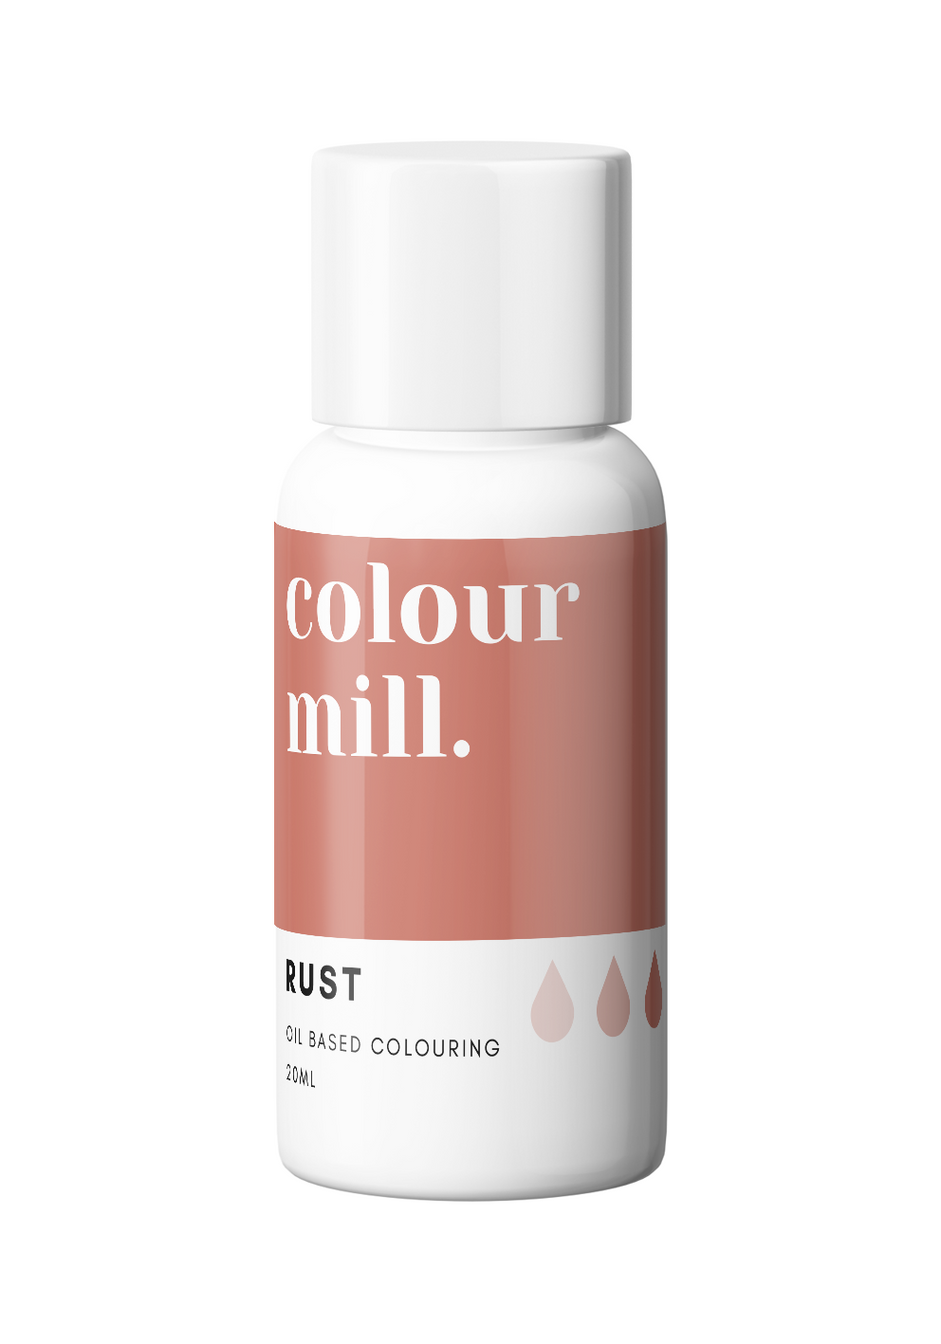 Colour Mill Oil Based Colouring 20ml Rust